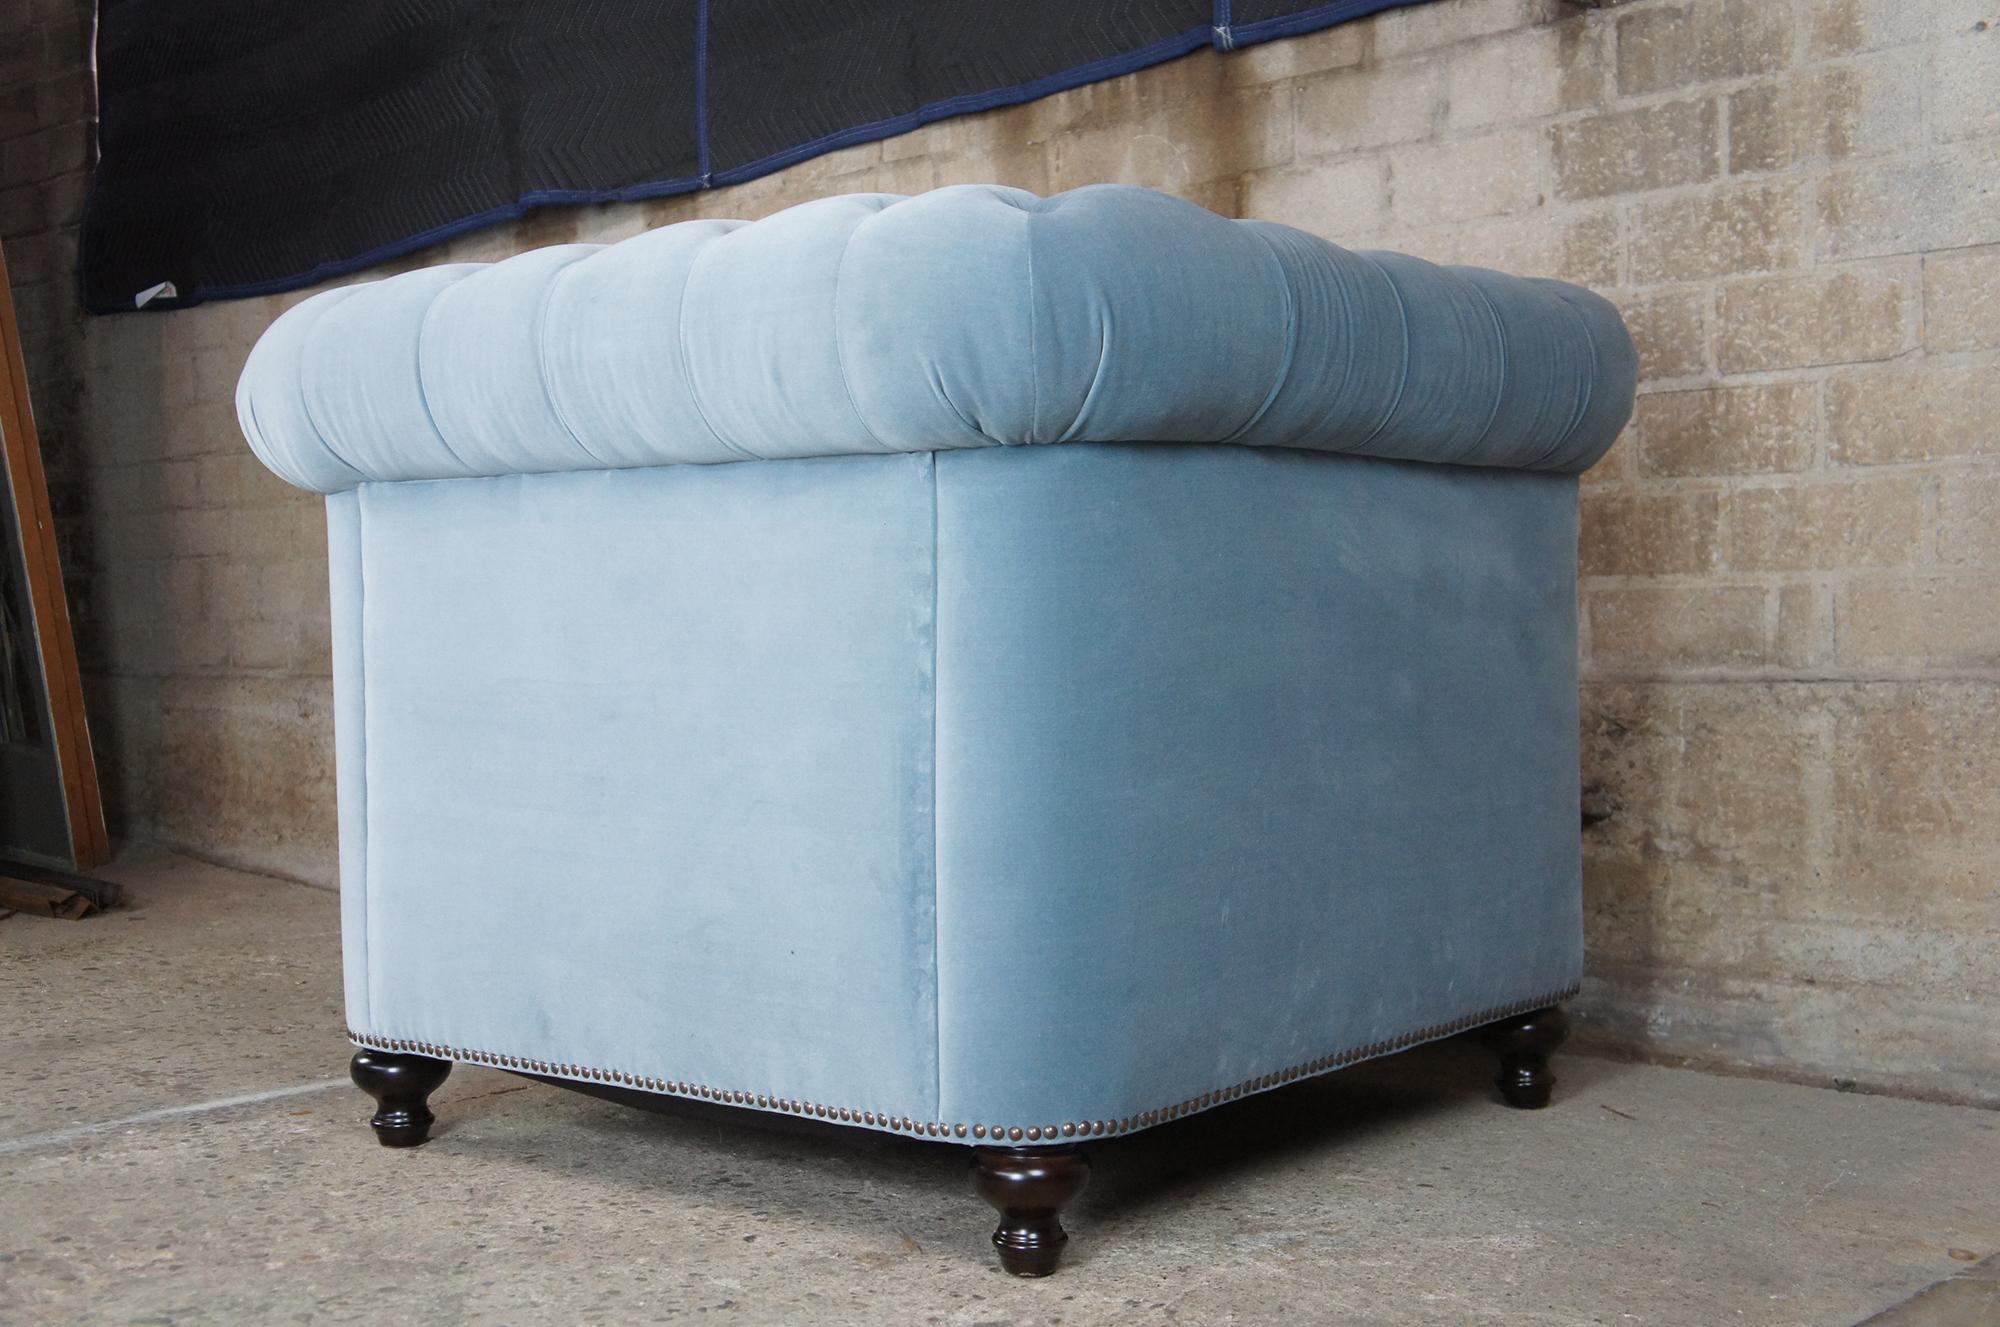 2 Frontgate Barrow Chesterfield Tufted Club Library Chairs Blue Nailhead Modern 2